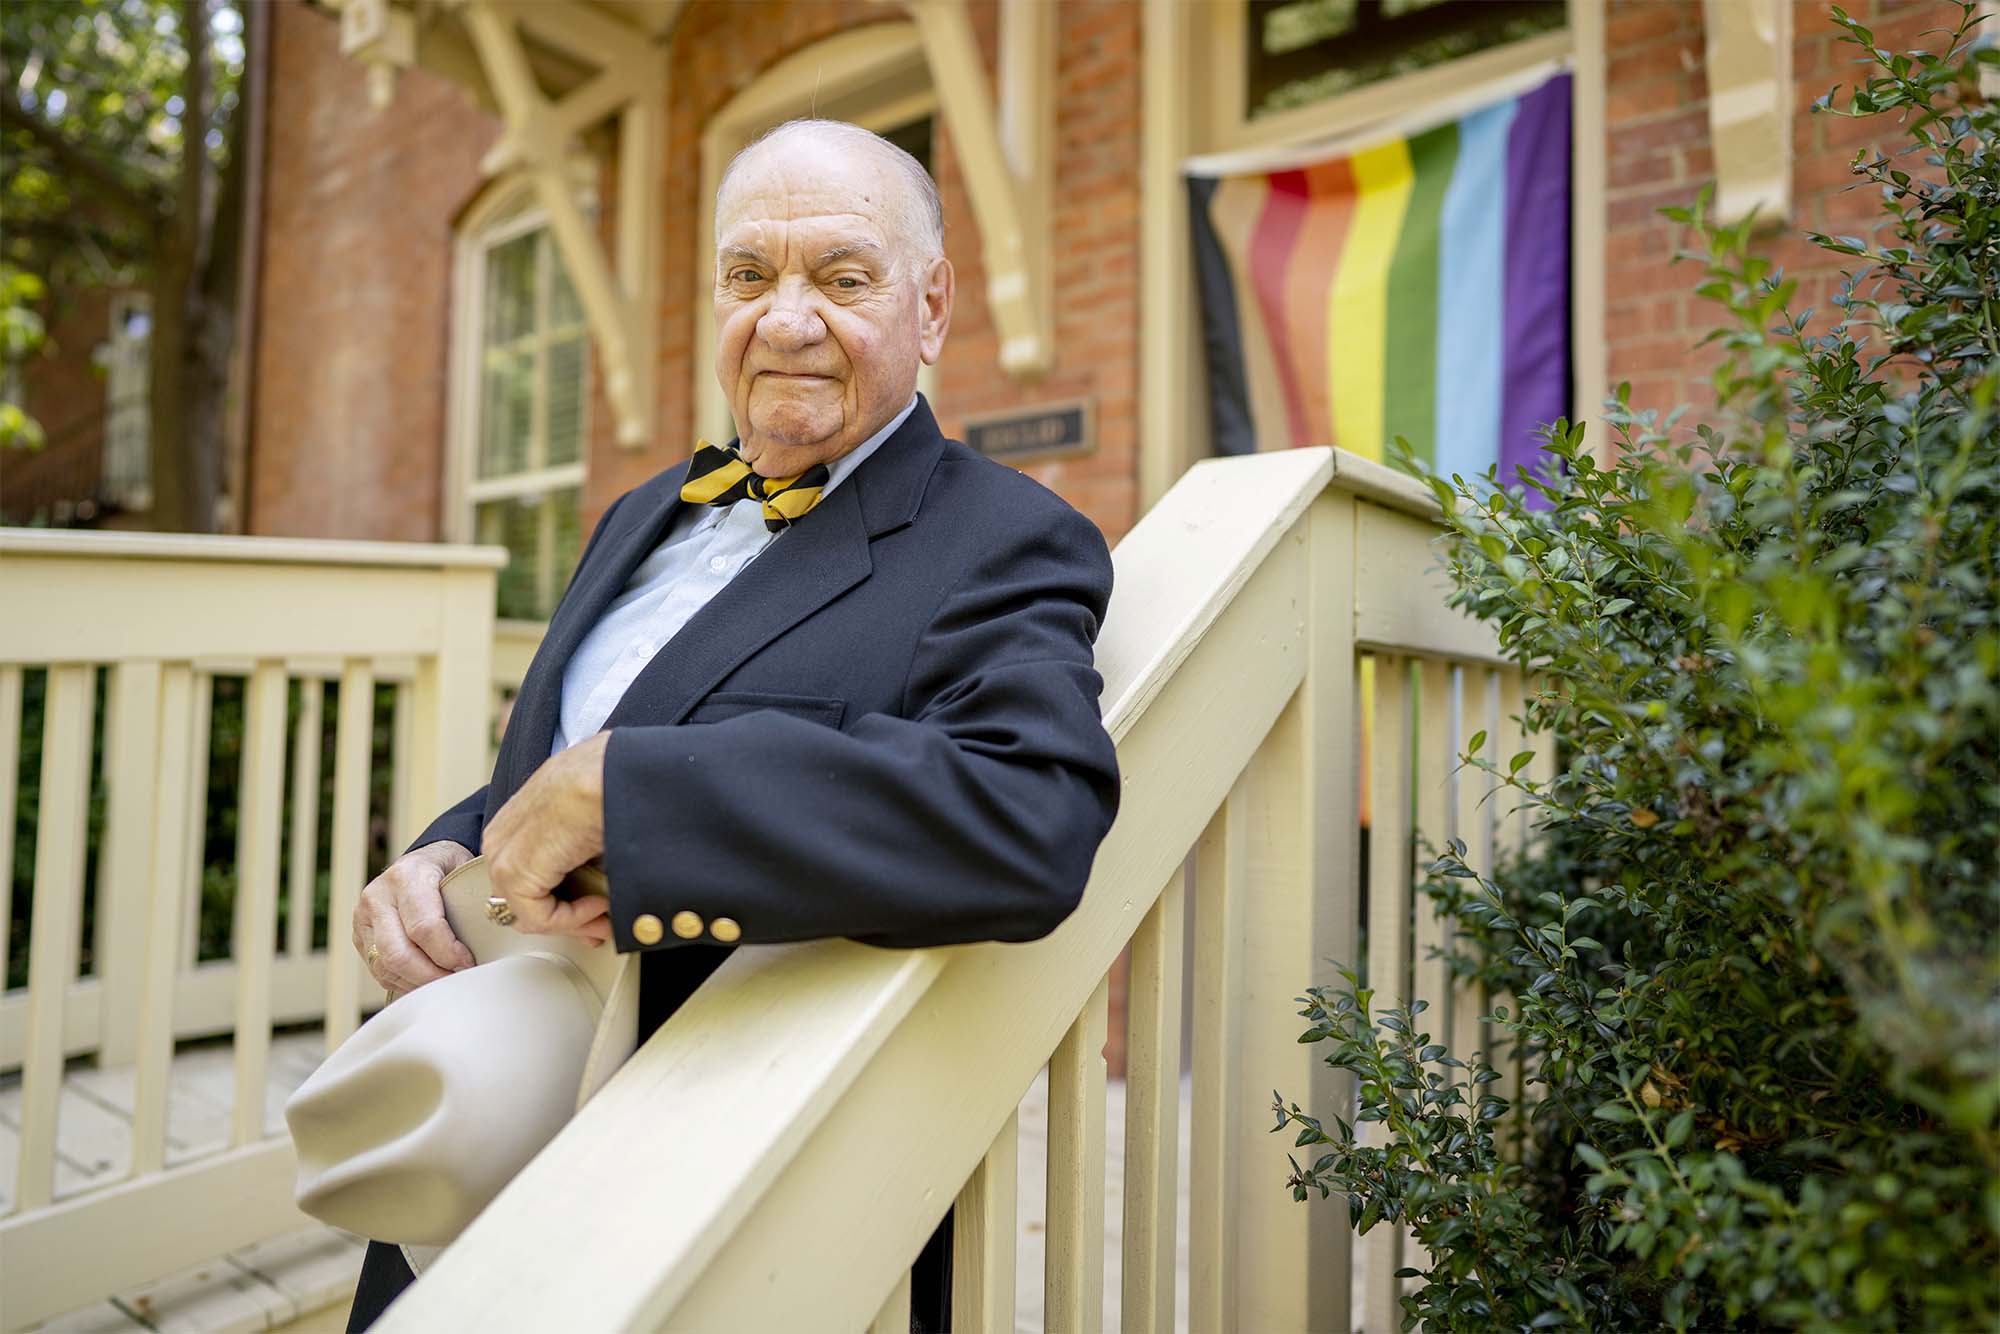 K.C. Potter, an older white man in a suit with a bowtie and holding a hat, leans on the stair railing outside the Center. A pride flag is visible in the background.